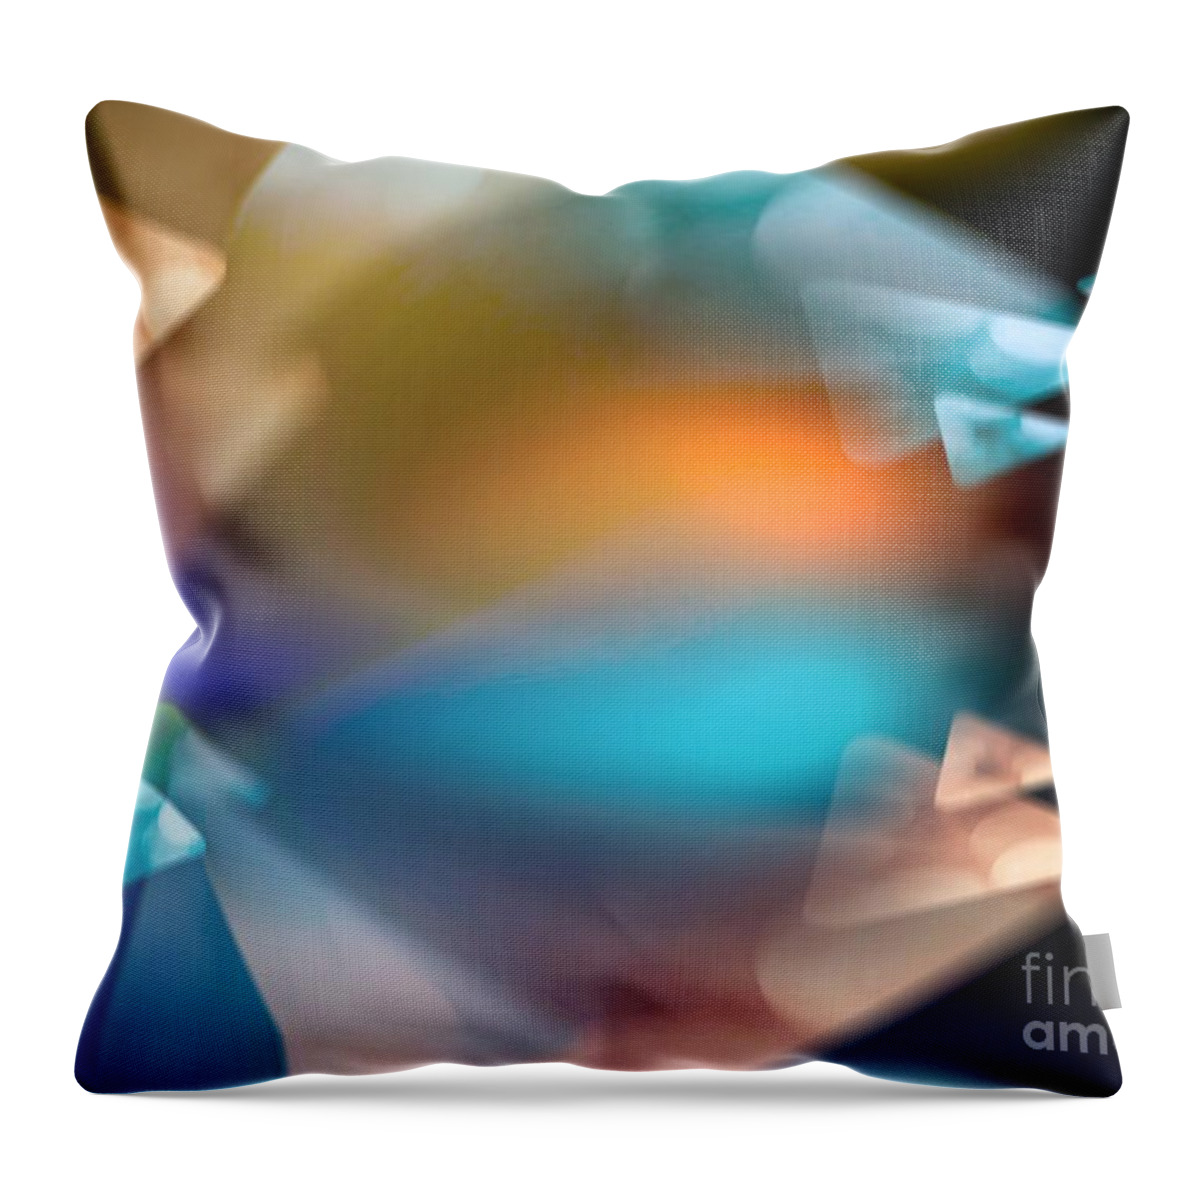 Digital Art Abstract Throw Pillow featuring the digital art Dreaming by Gayle Price Thomas